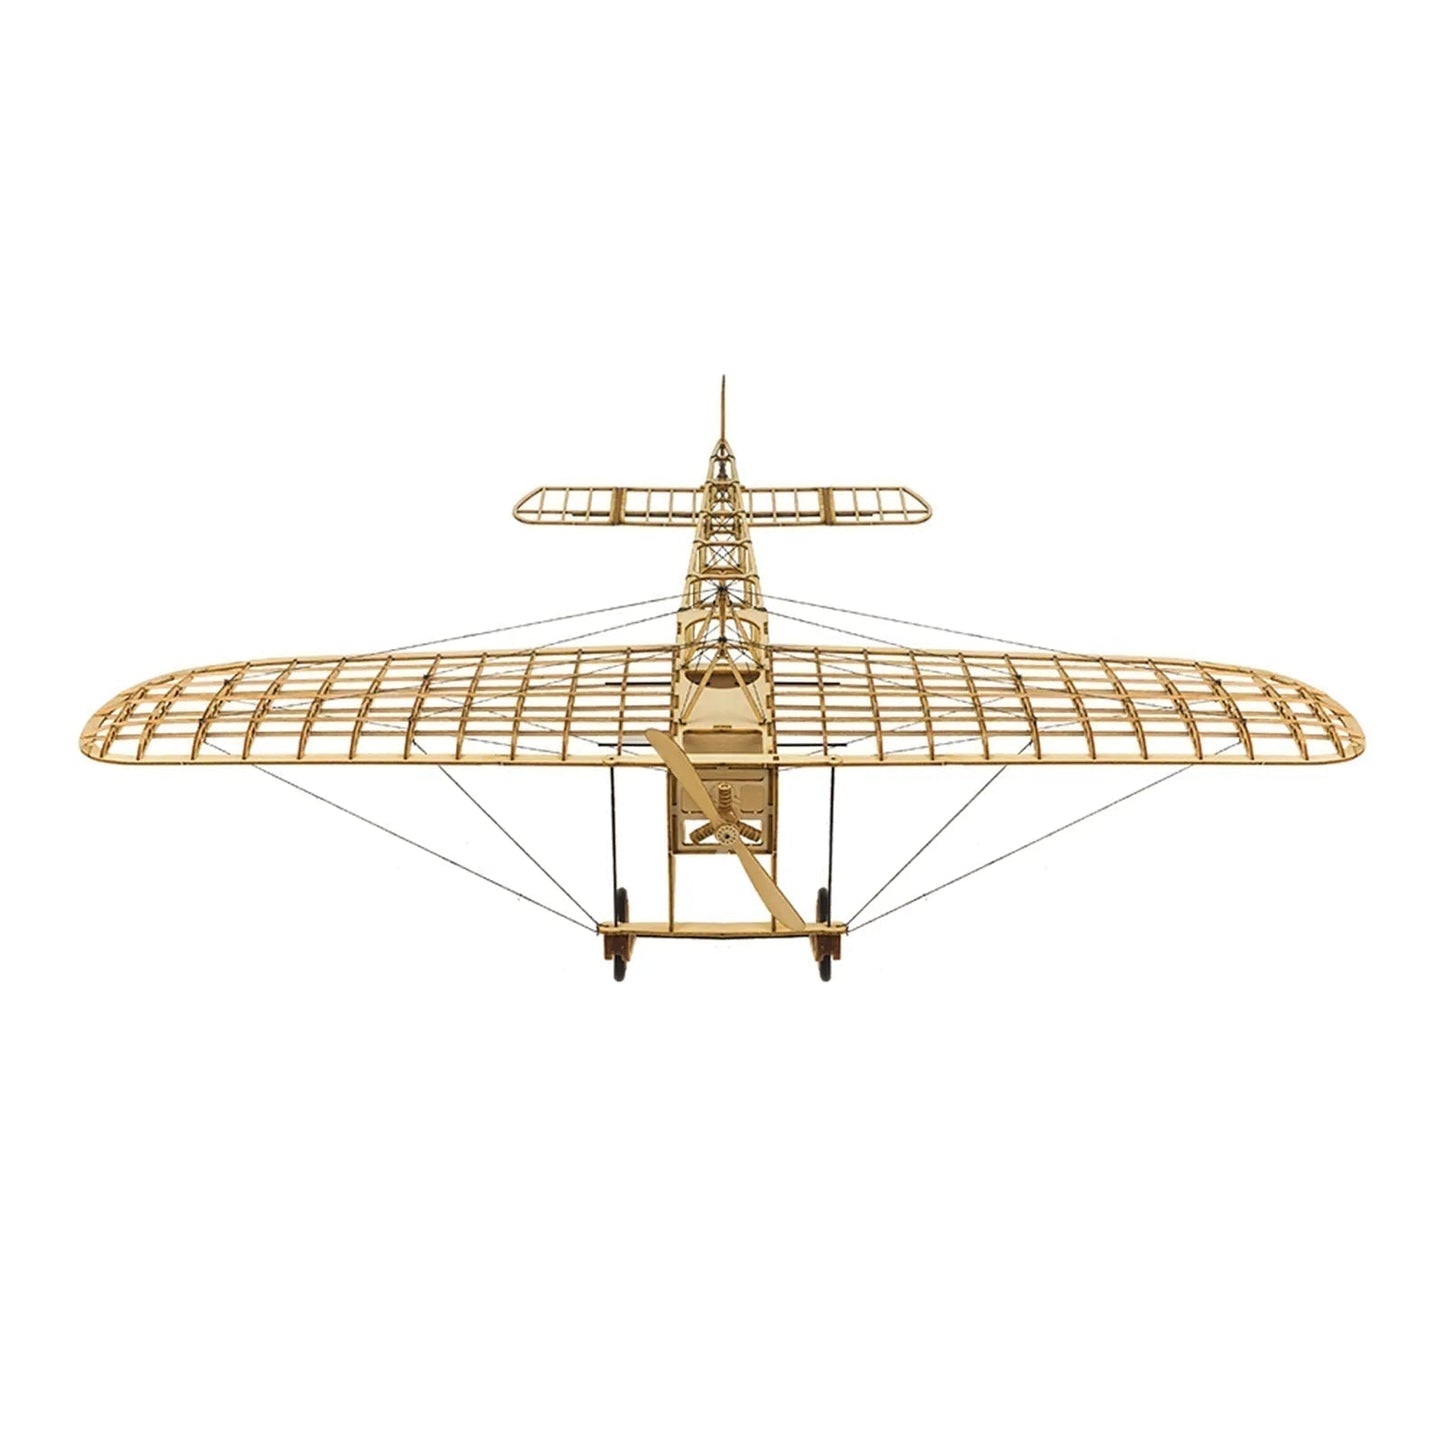 DWH VX14 Wooden 1:23 Scale Bleriot XI Airplane Model Ziggy's Pop Toy Shoppe